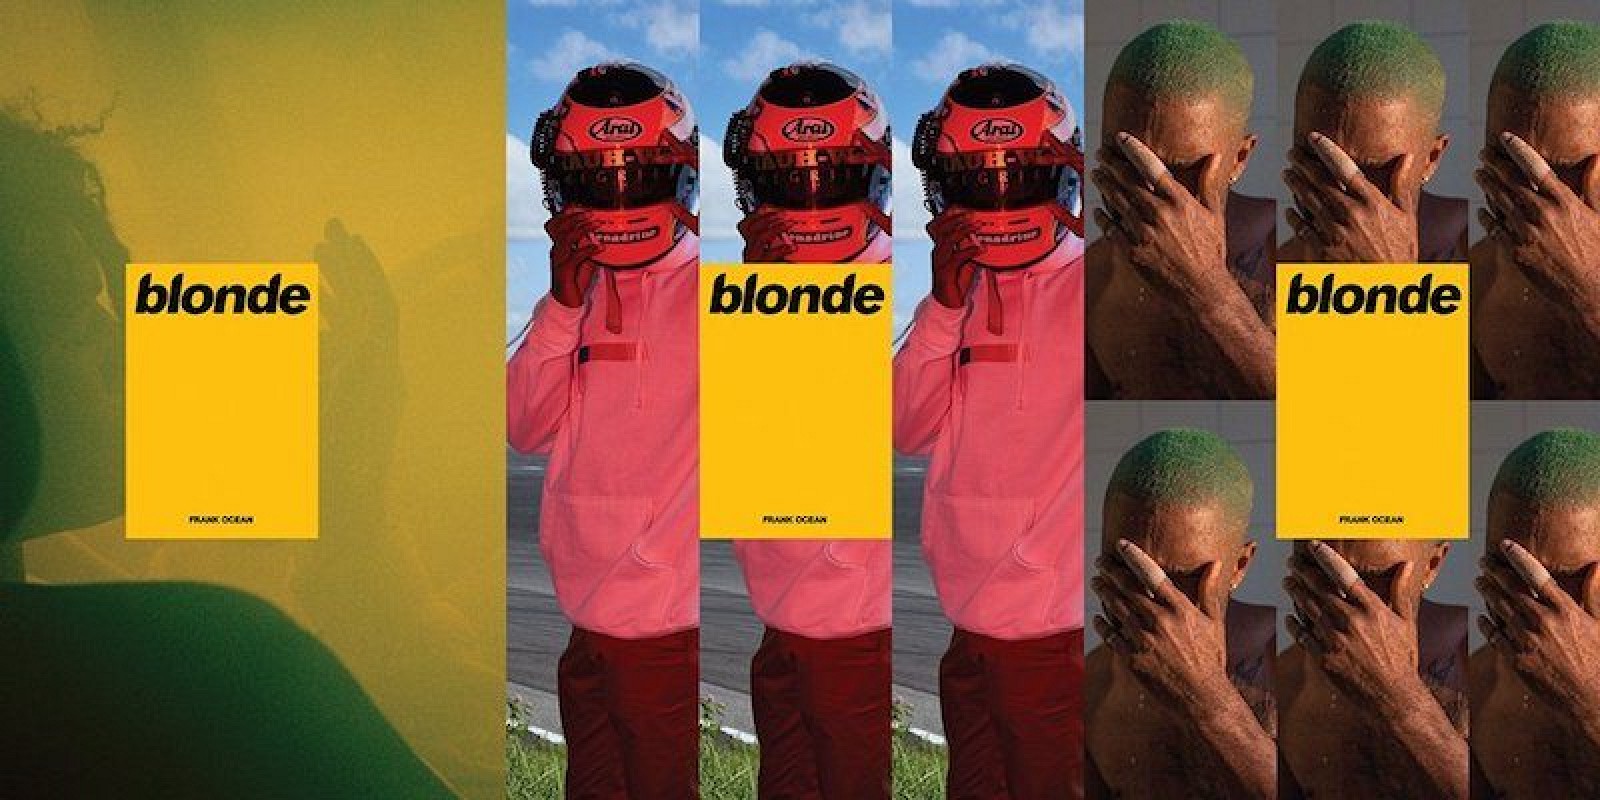 Frank Ocean's 'Blonde' Album Now Available Exclusively on